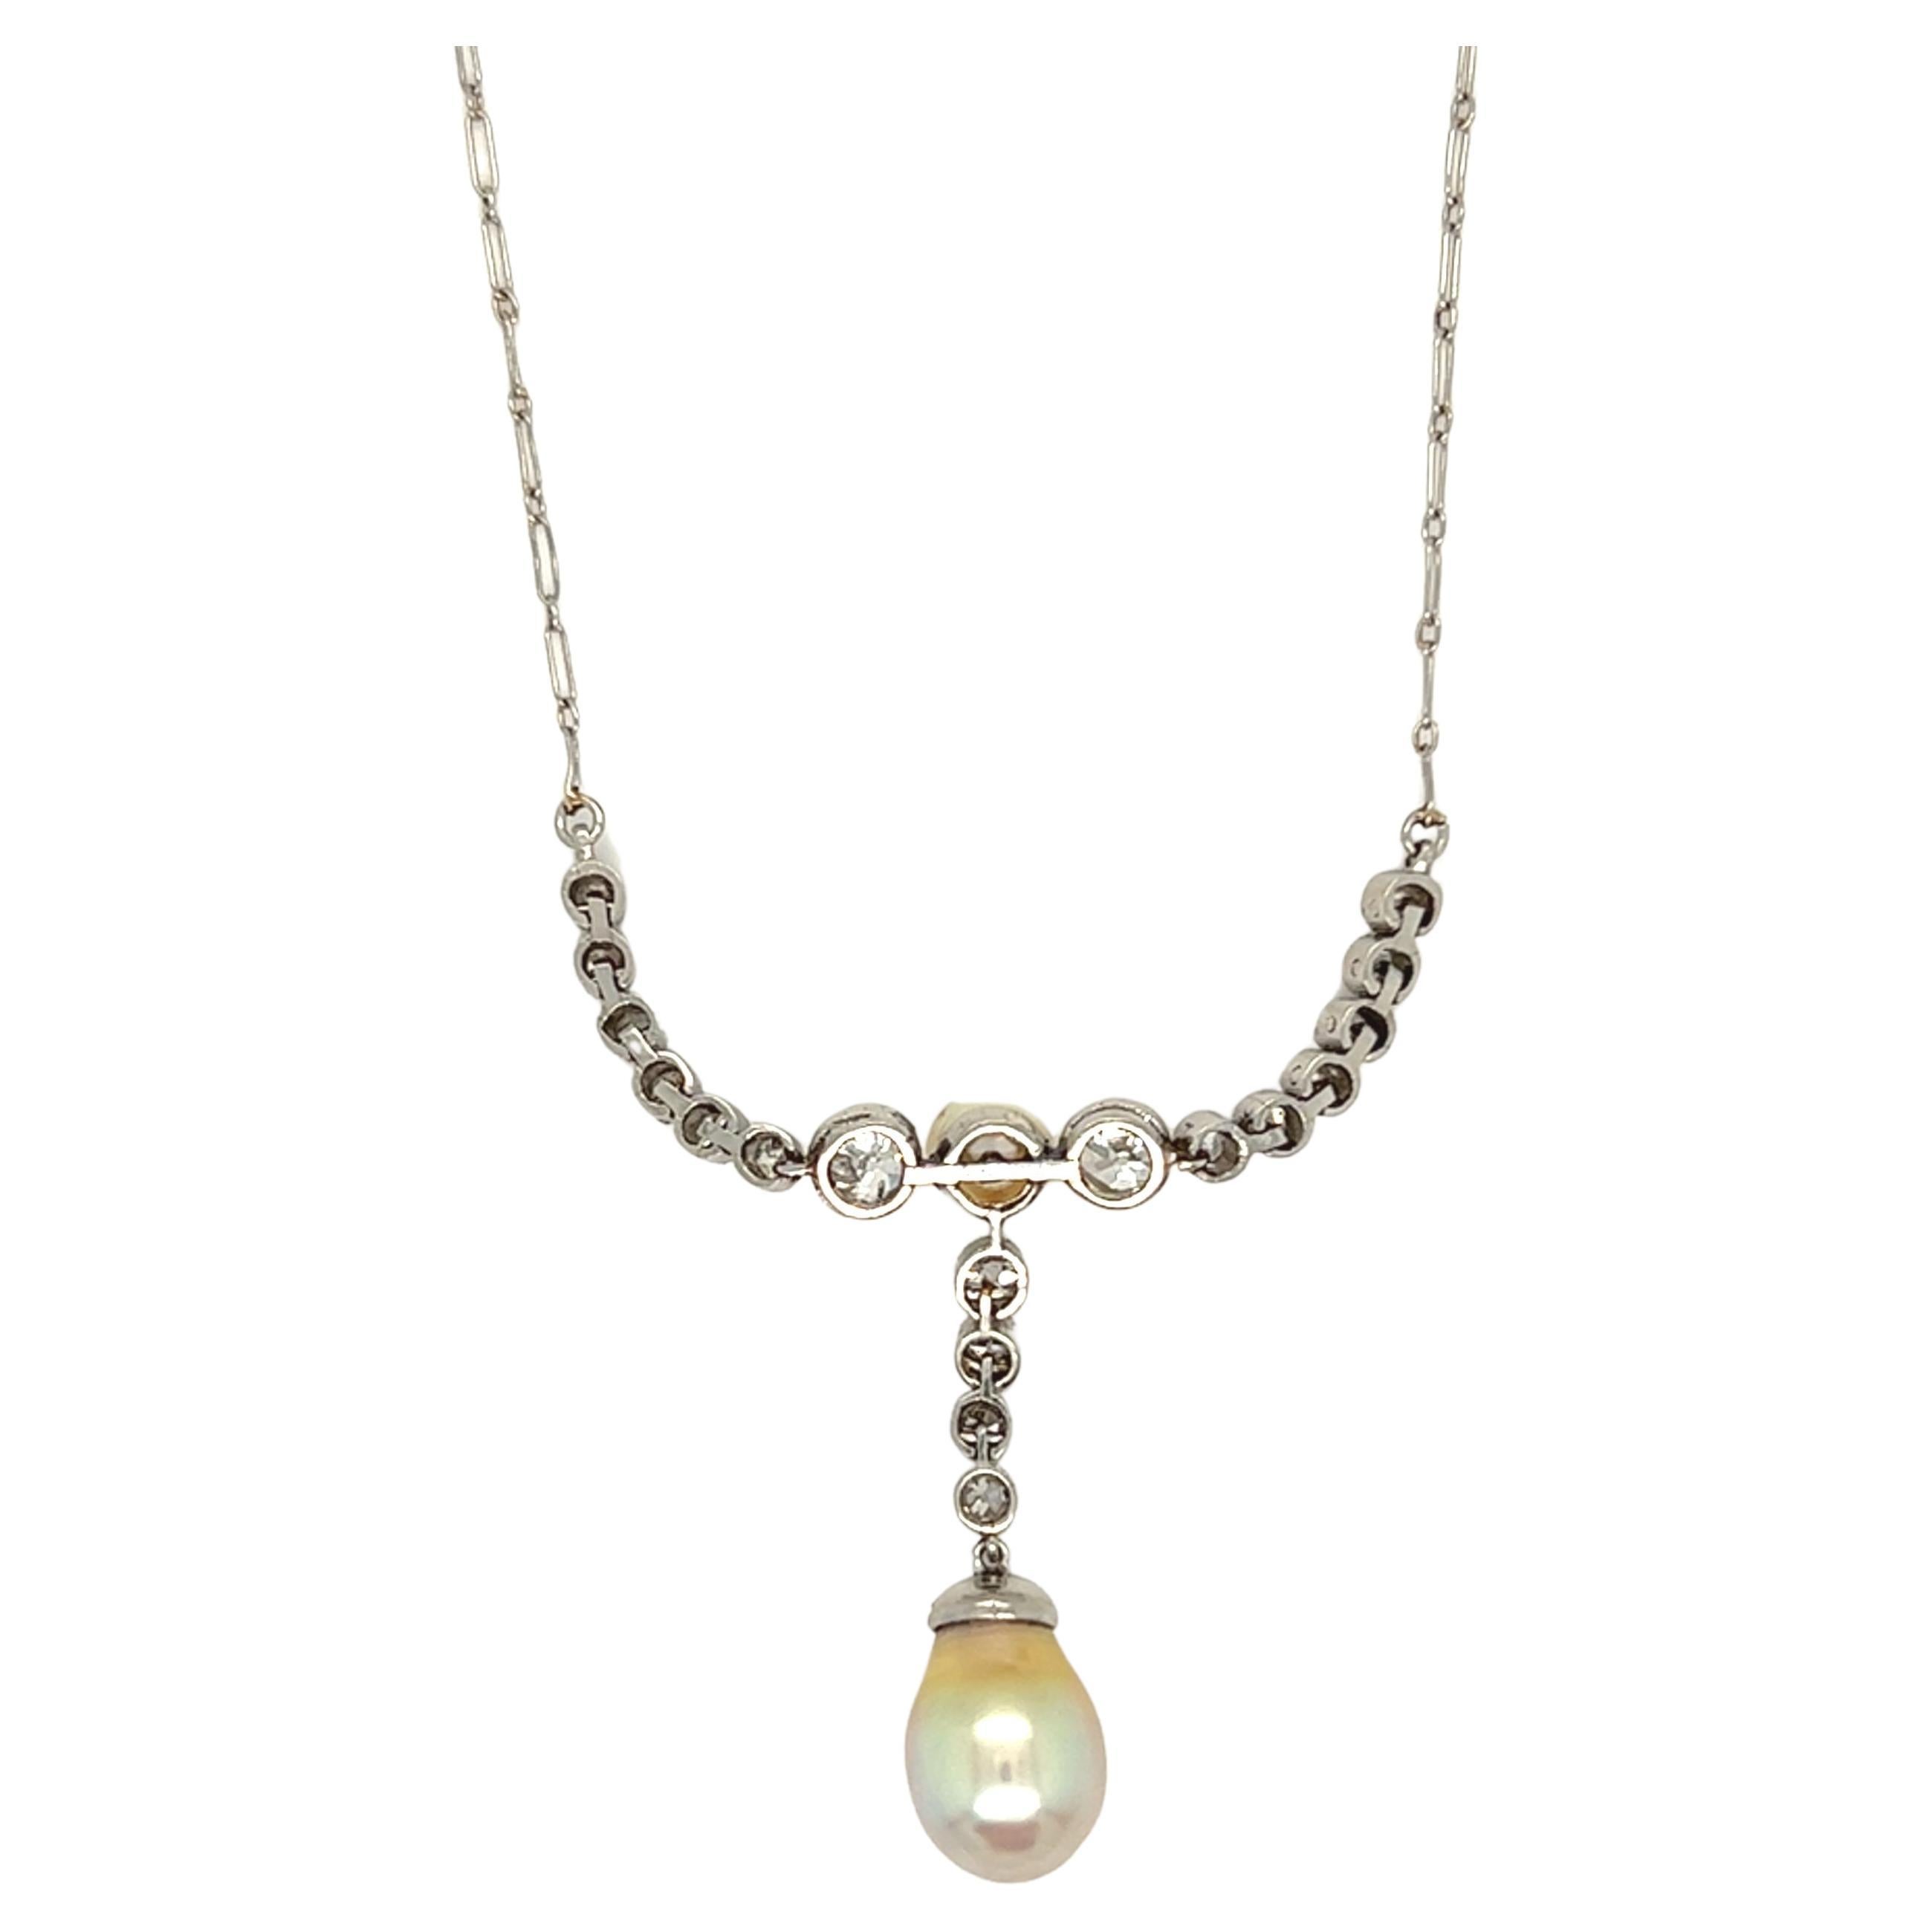 A beautiful Edwardian pearl and diamond necklace features brilliantly white diamonds and two gorgeous pearls in a romantic milgrain detail in Platinum with a delicate platinum chain. It is in immaculate condition. The total weight of diamond is